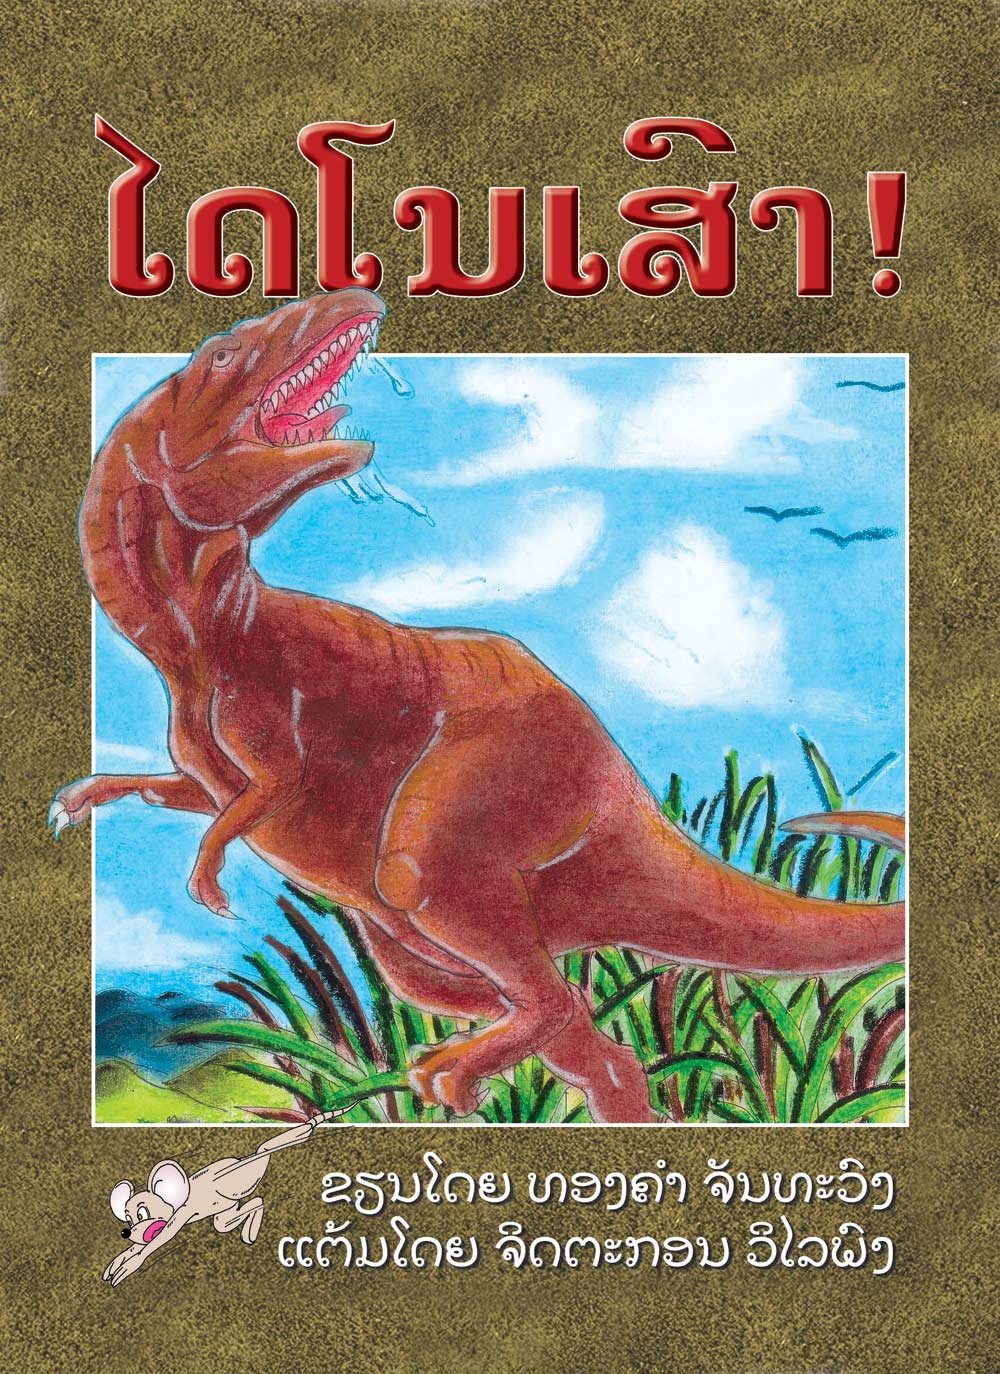 Dinosaurs! large book cover, published in Lao language